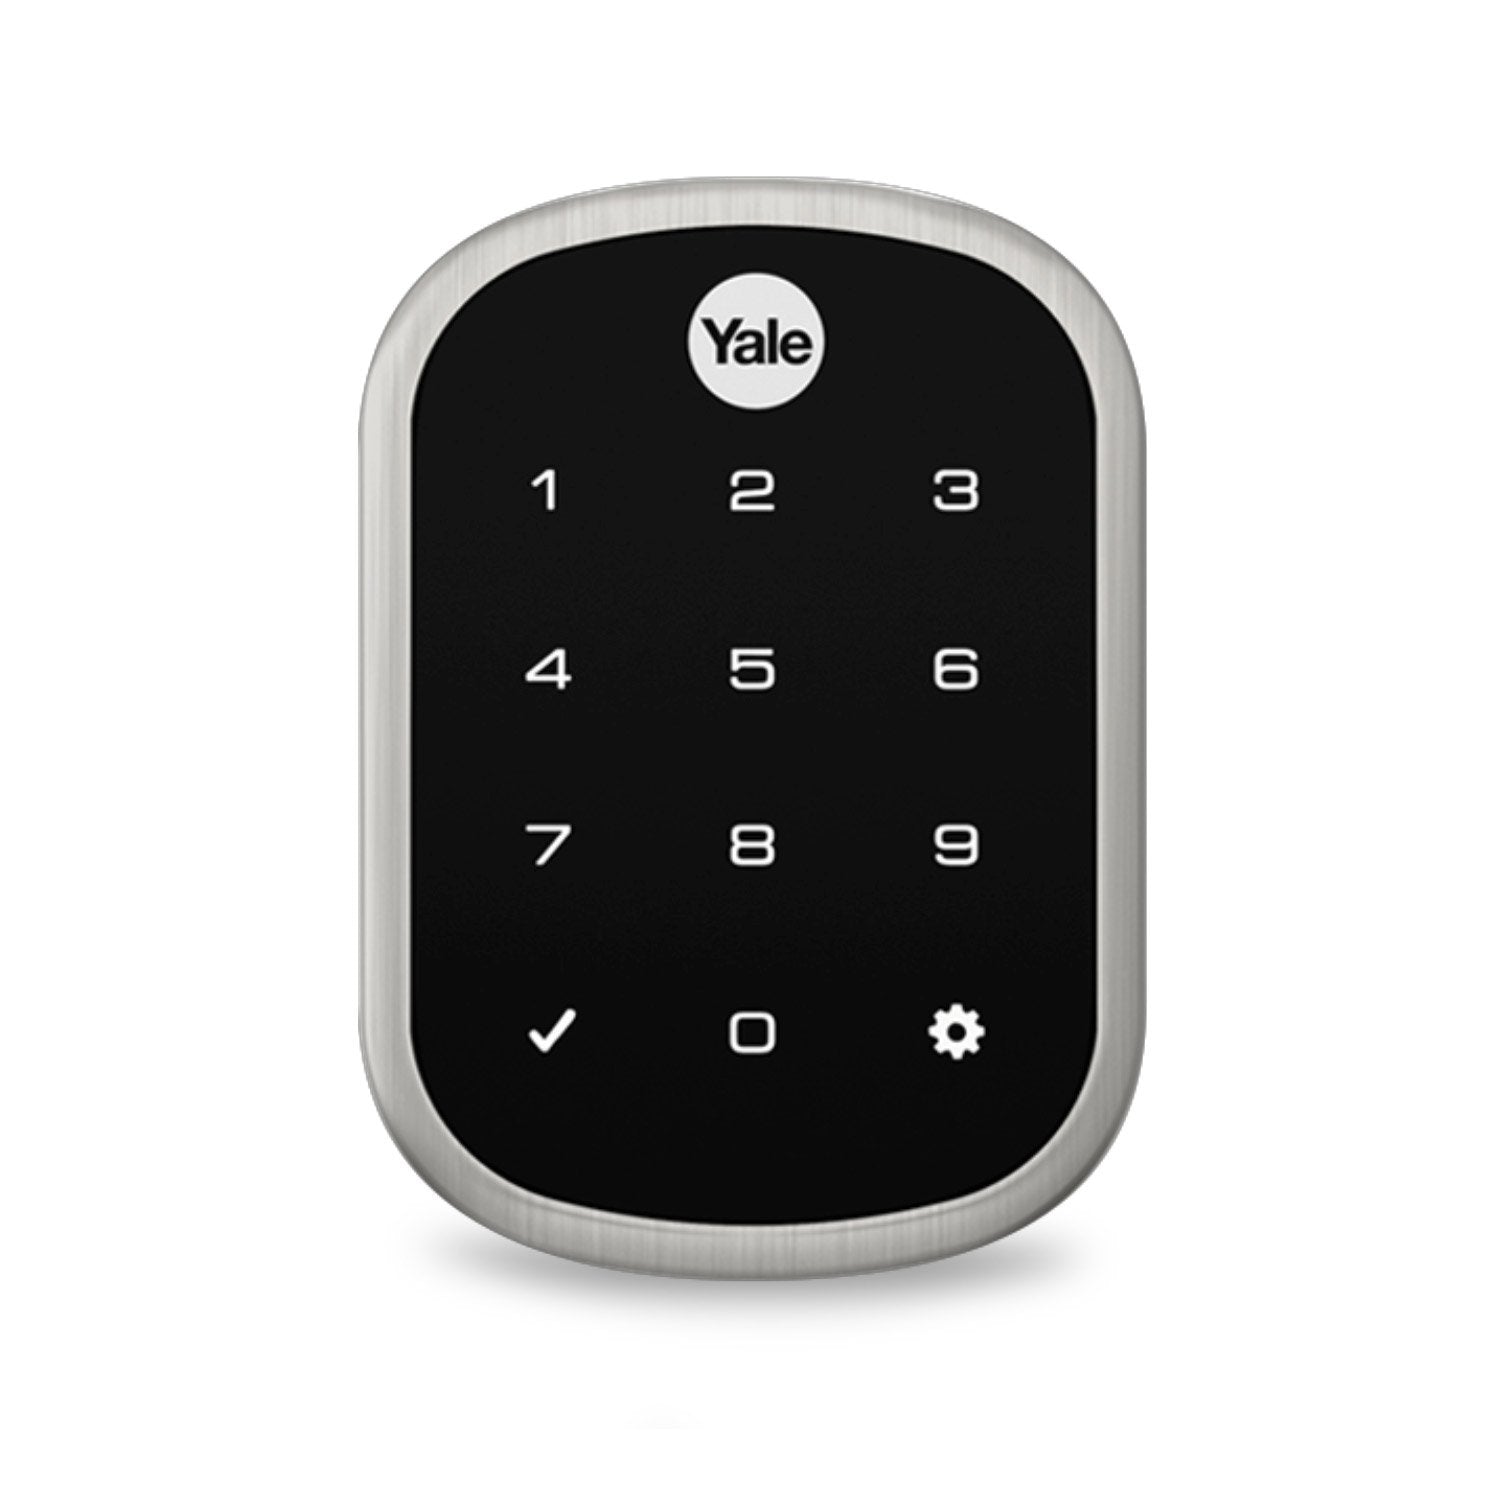 Yale Real Living Assure Lock SL With Z-Wave Plus (for Works with Ring Alarm Security System) - Yale Real Living Assure Lock SL With Z-Wave Plus with satin nickel finish.